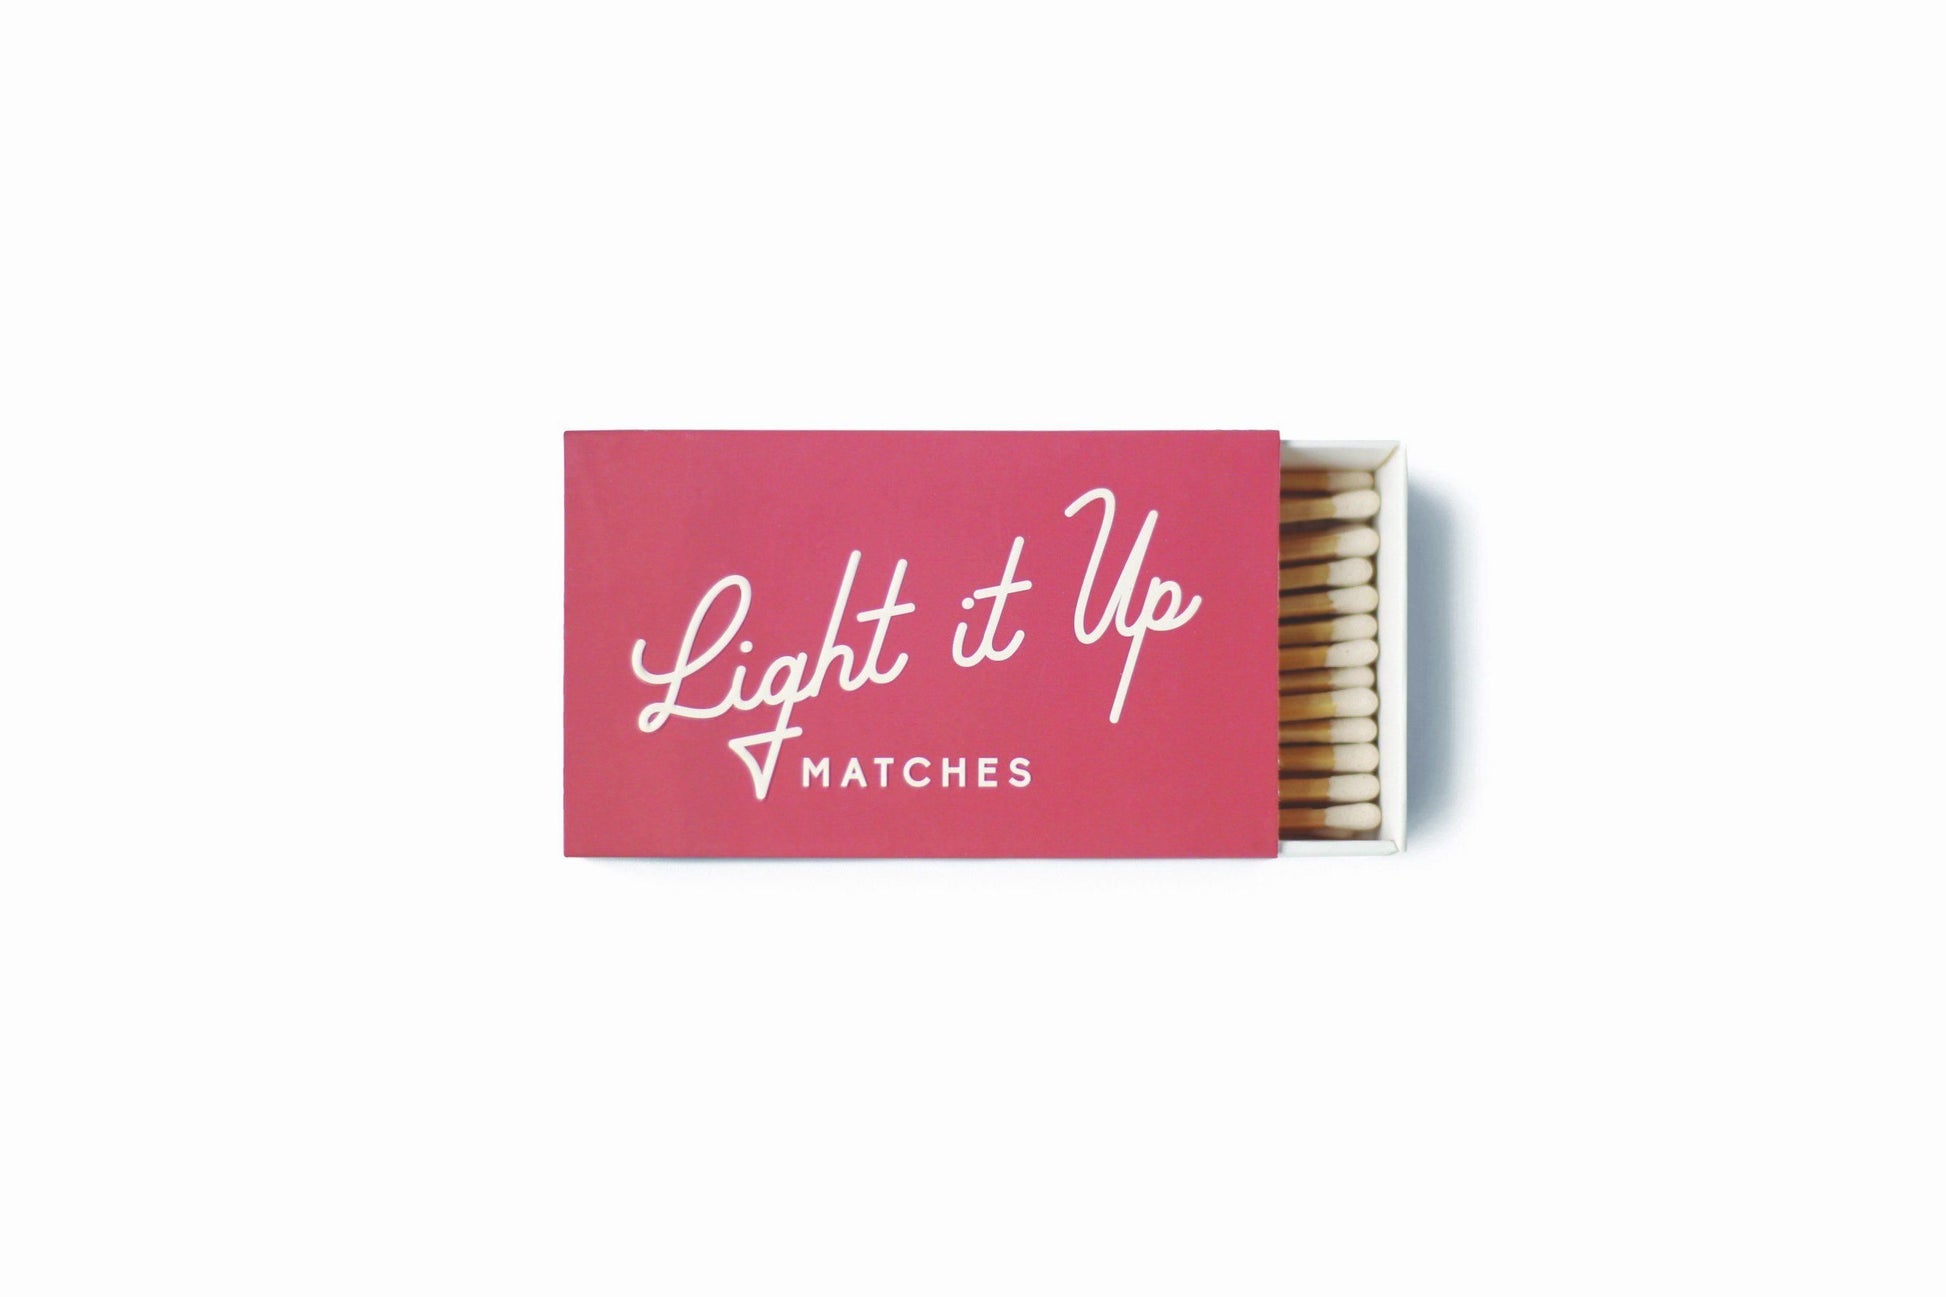 Matches - "Light it Up" - red colored box